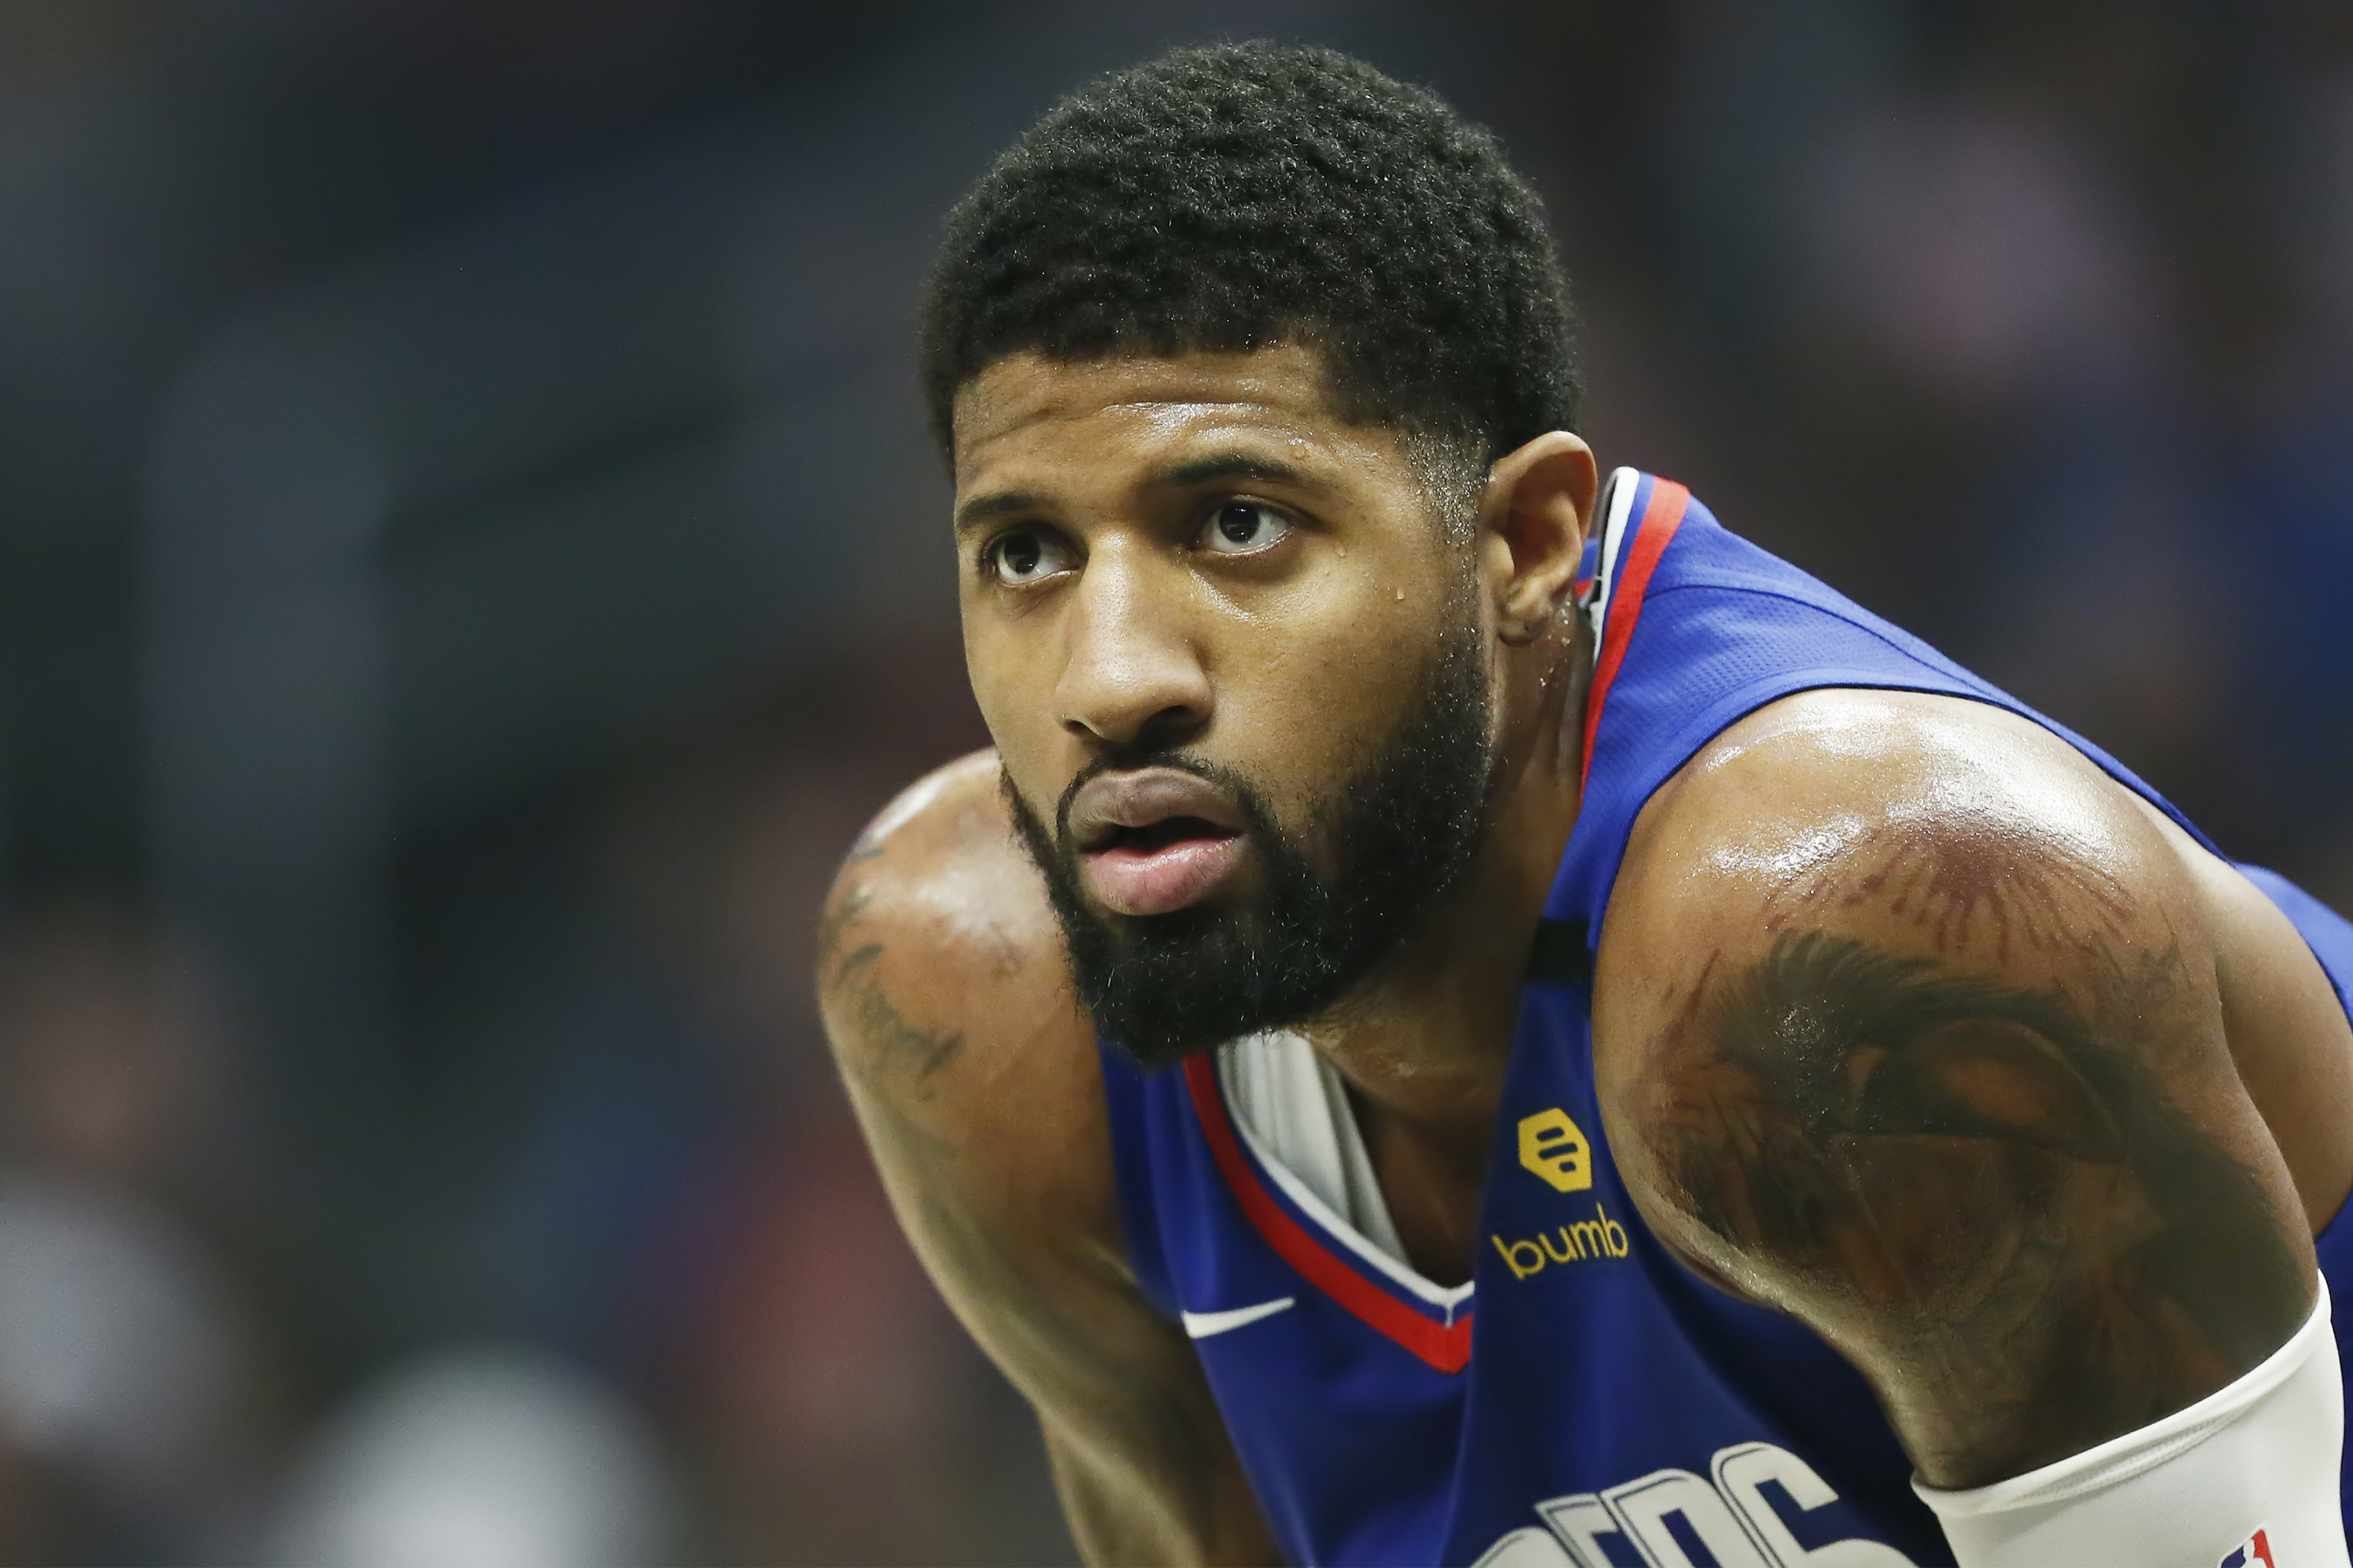 LA Clippers: Paul George's top 3 performances of the season